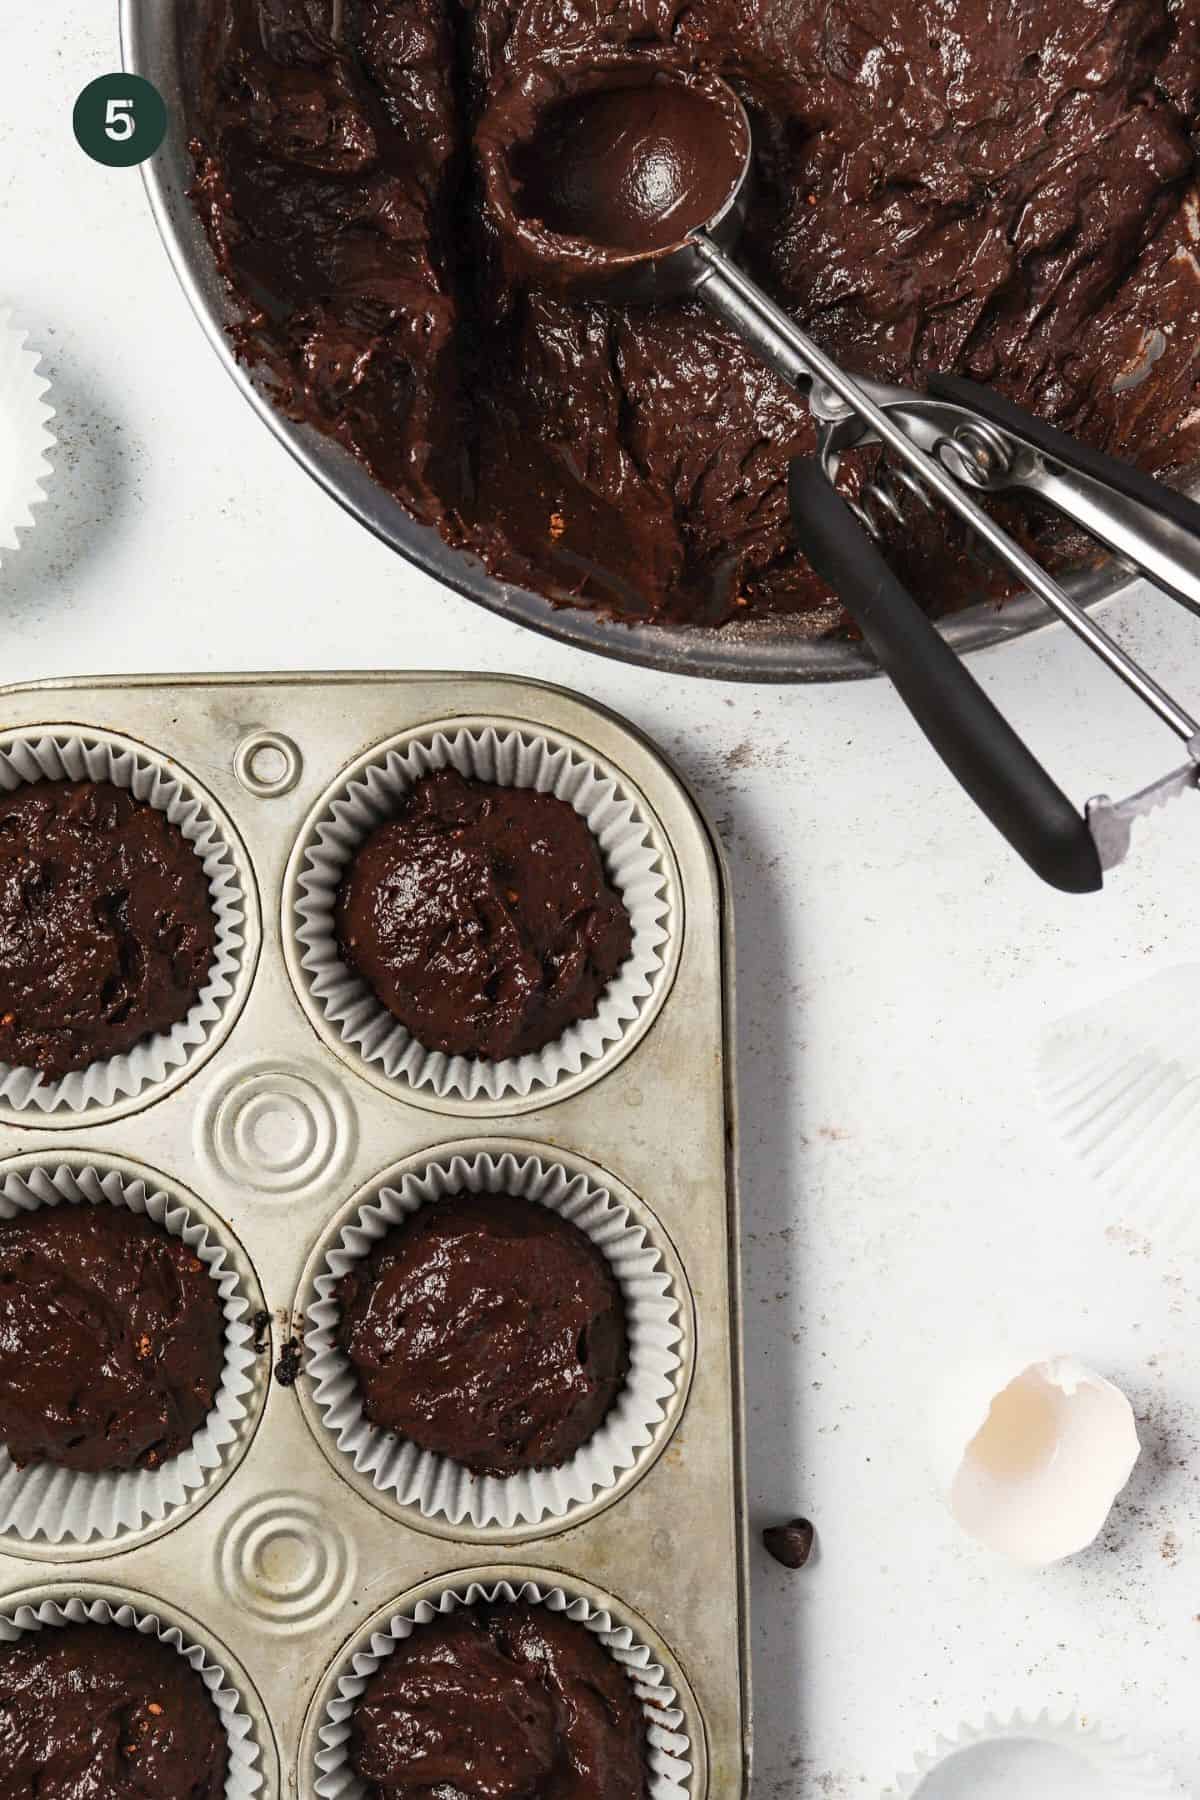 Batter added to a muffin tin to bake.